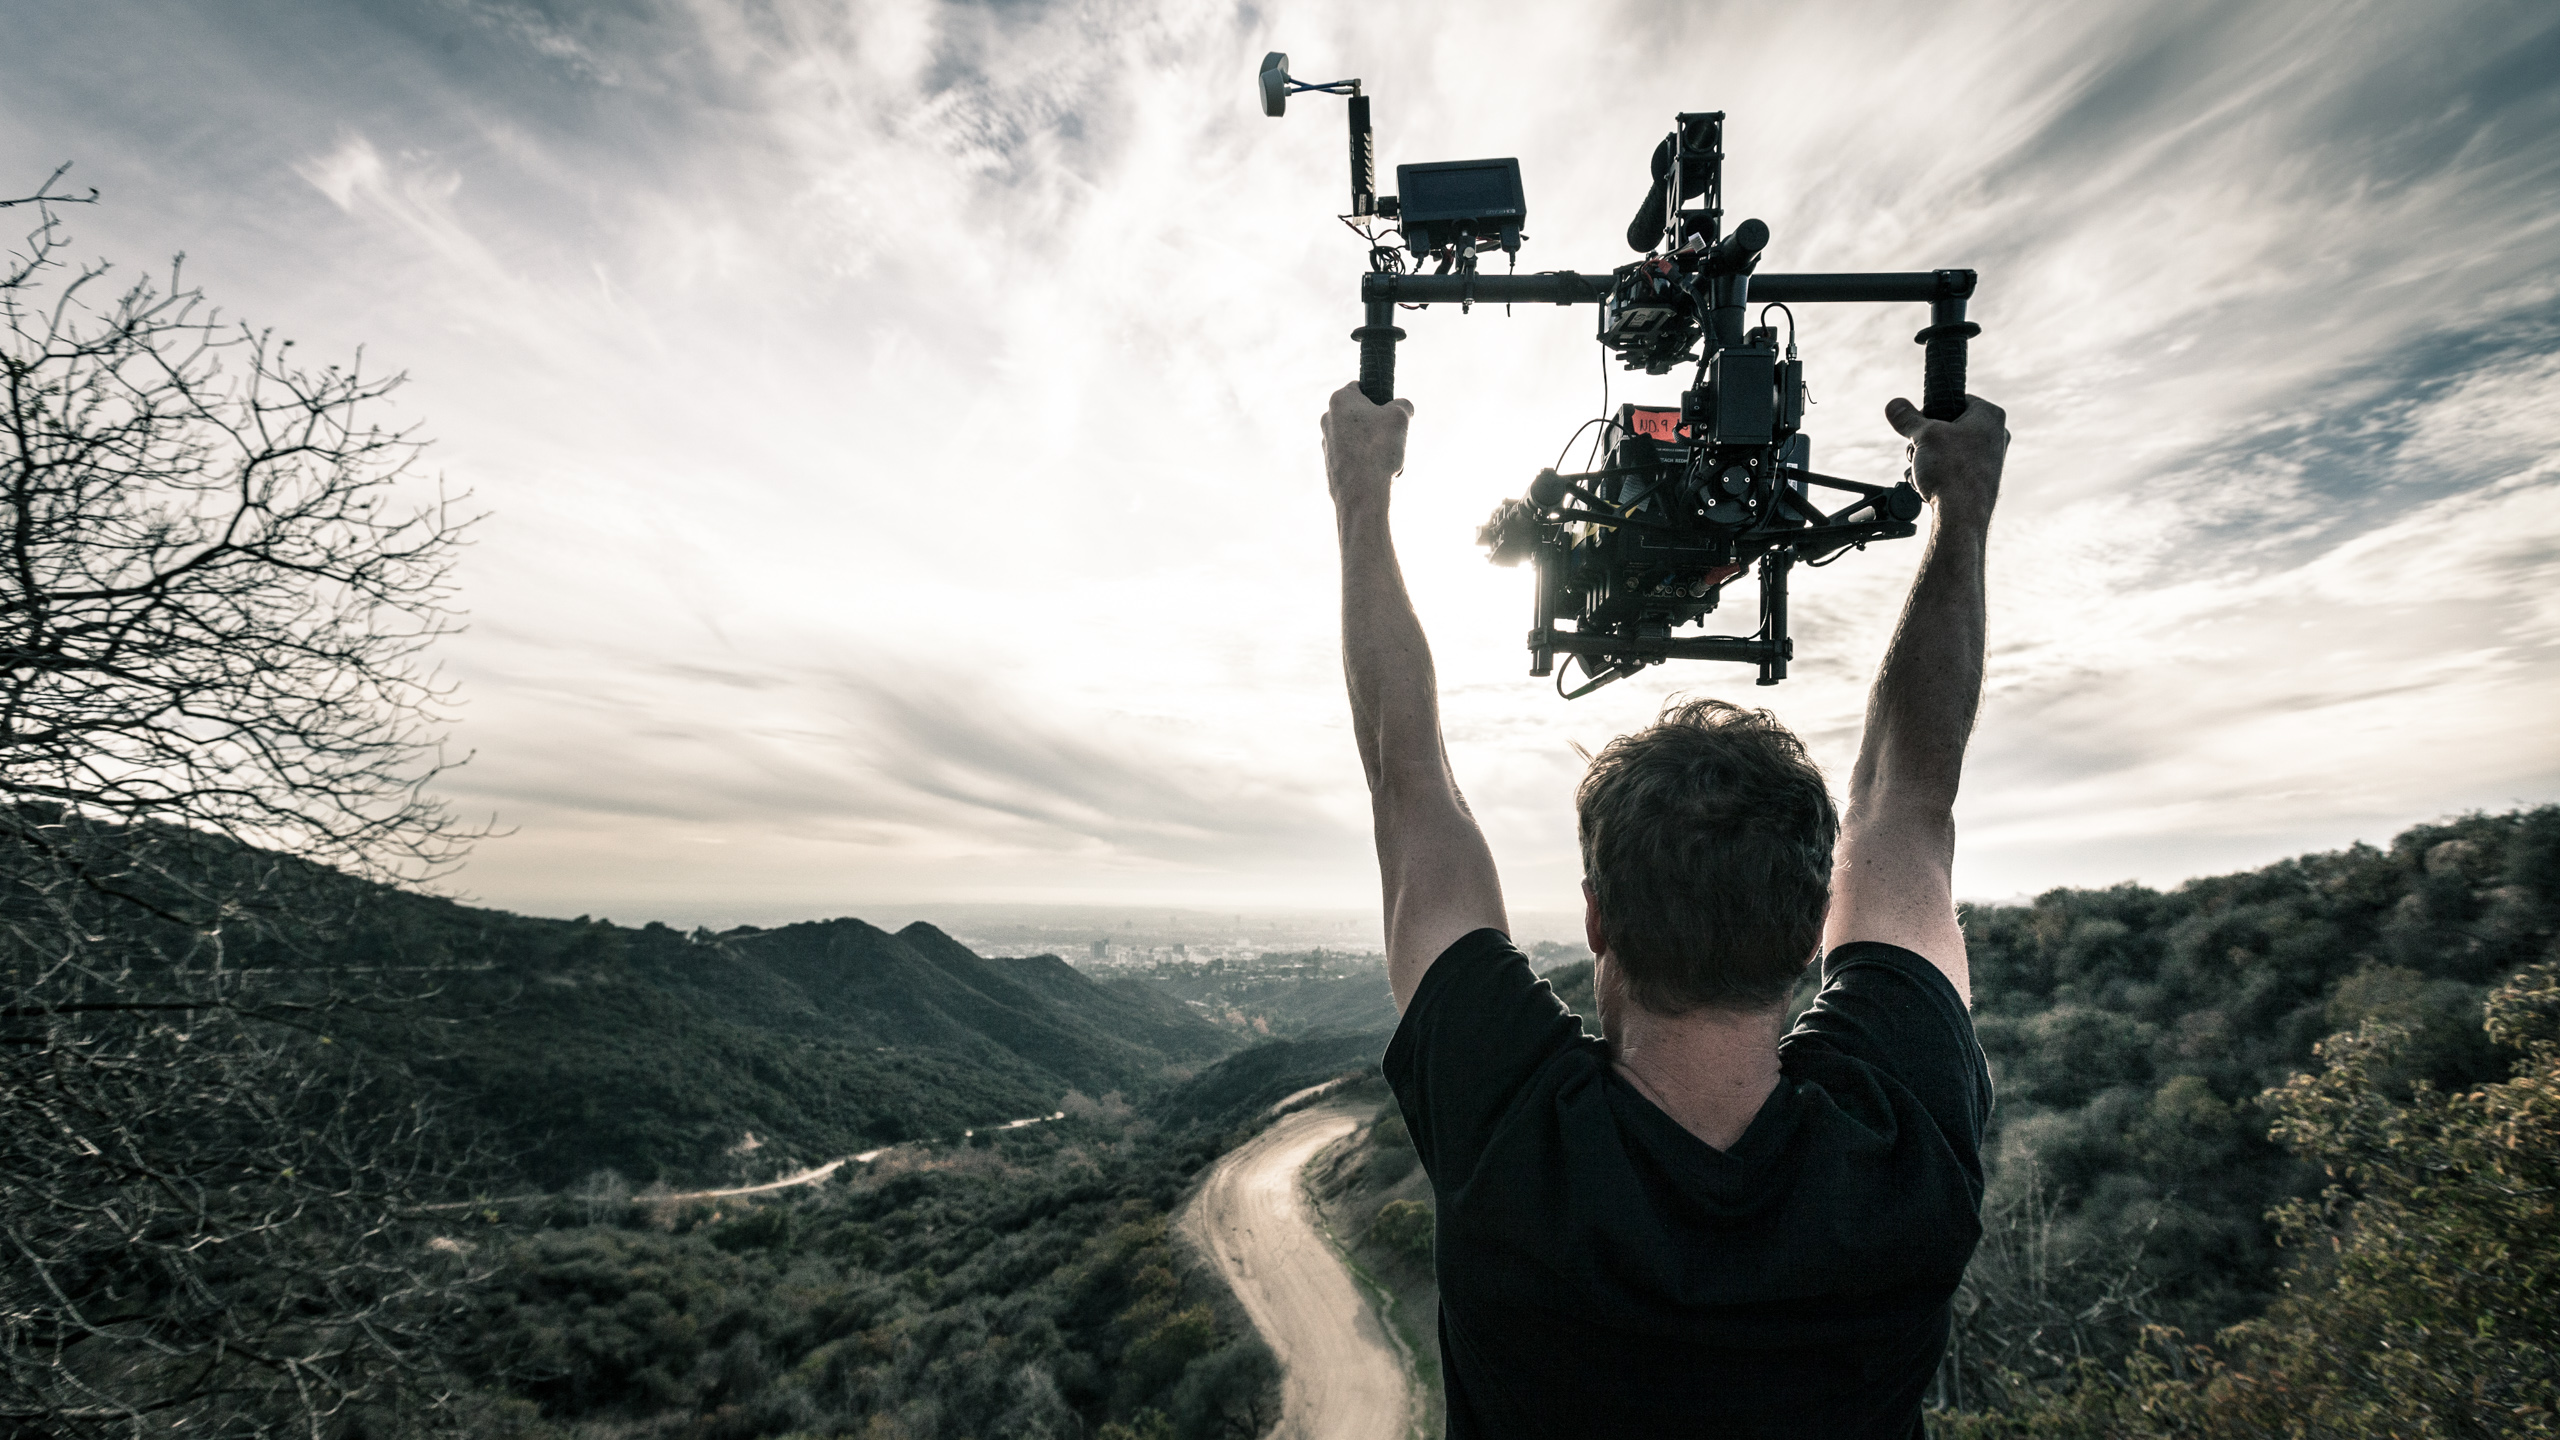 Shooting MoVI landscapes in the hills of LA on a Nike shoot.